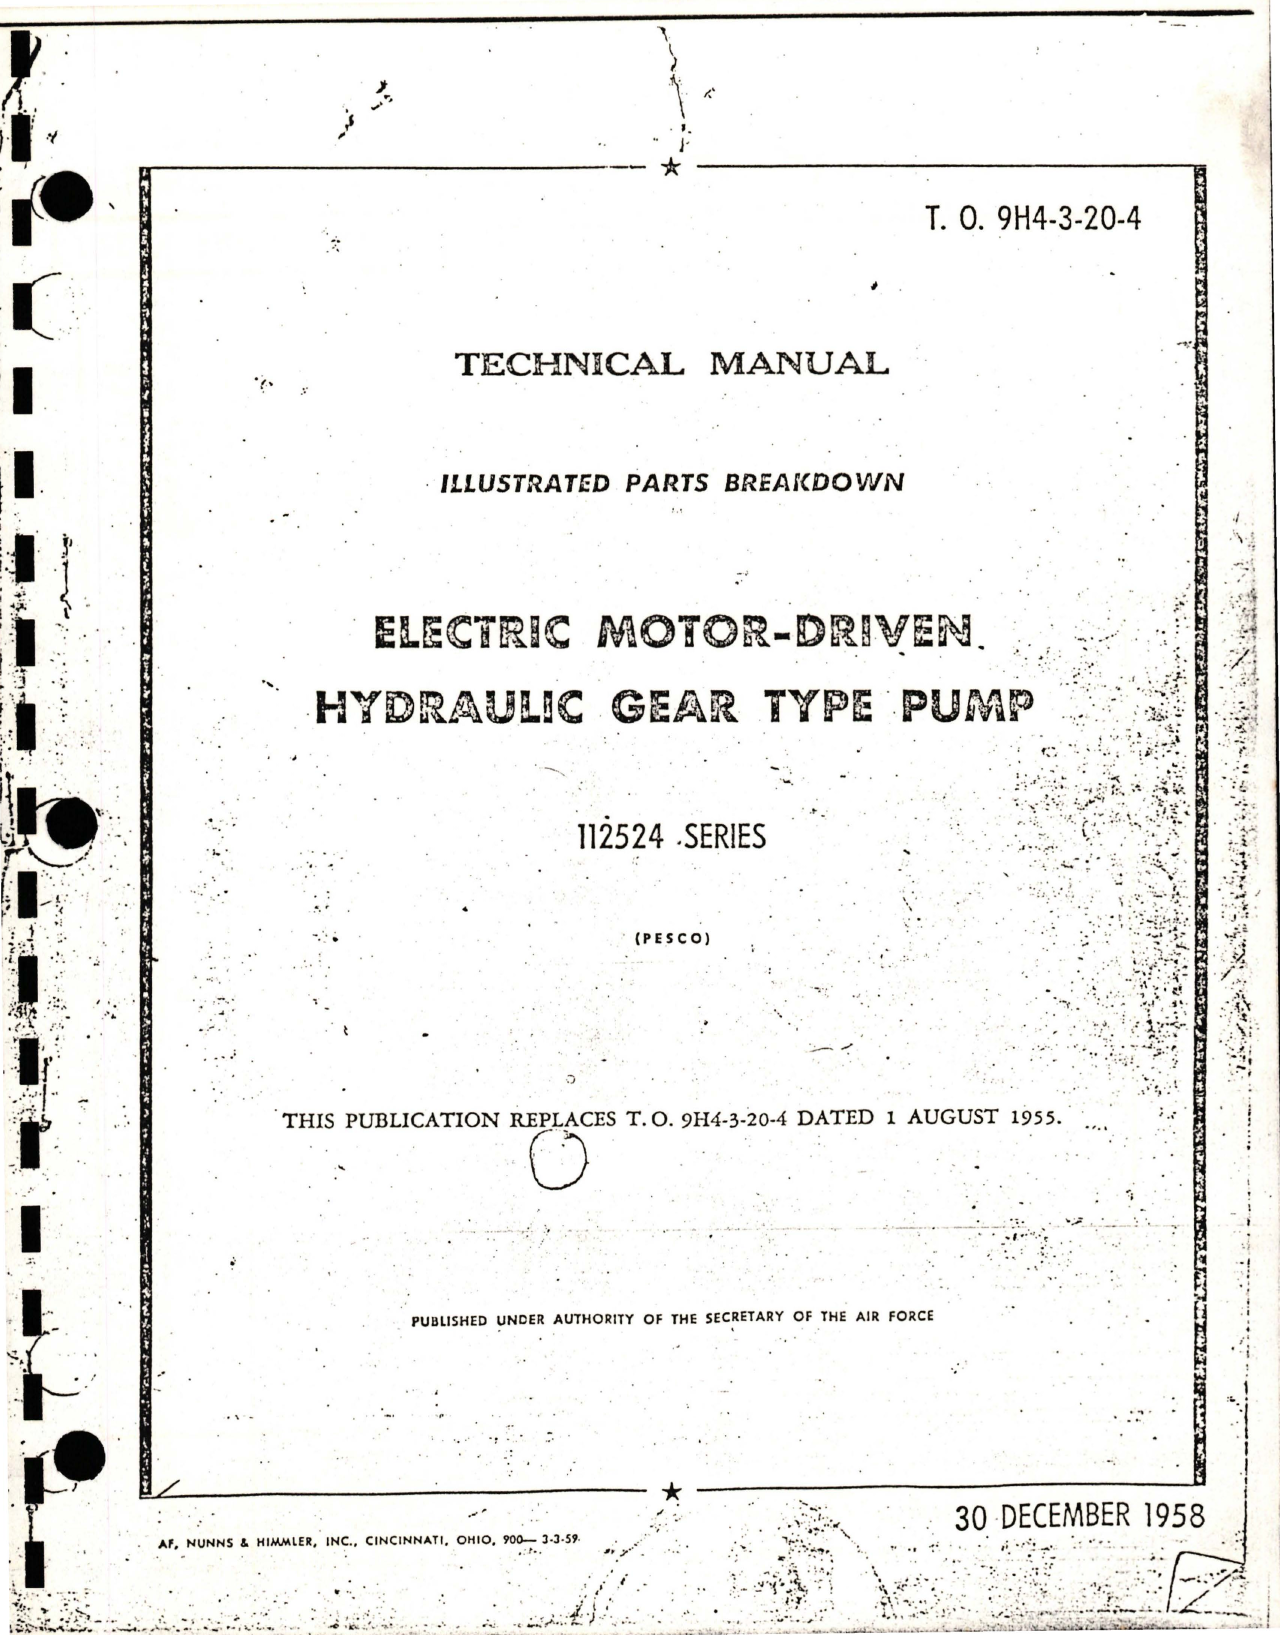 Sample page 1 from AirCorps Library document: Illustrated Parts Breakdown for Electric Motor-Driven Hydraulic Gear Type Pump - 112524